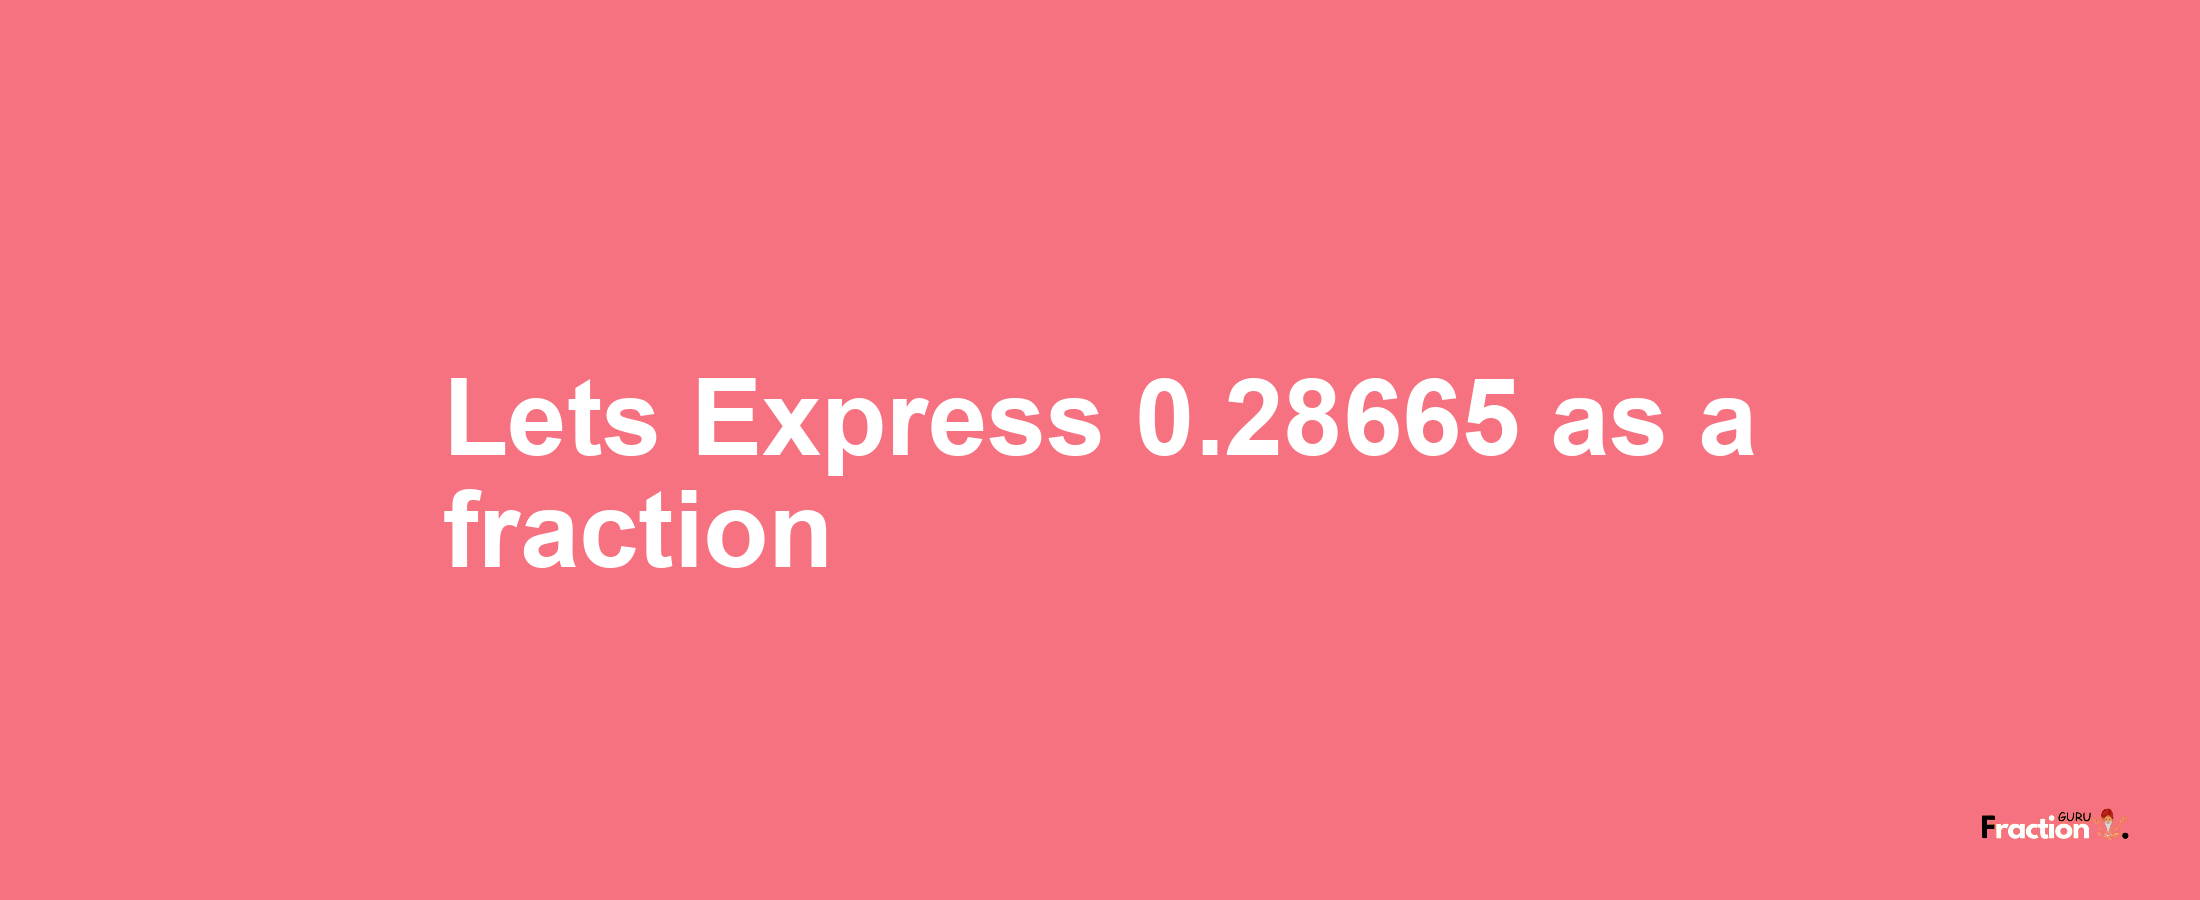 Lets Express 0.28665 as afraction